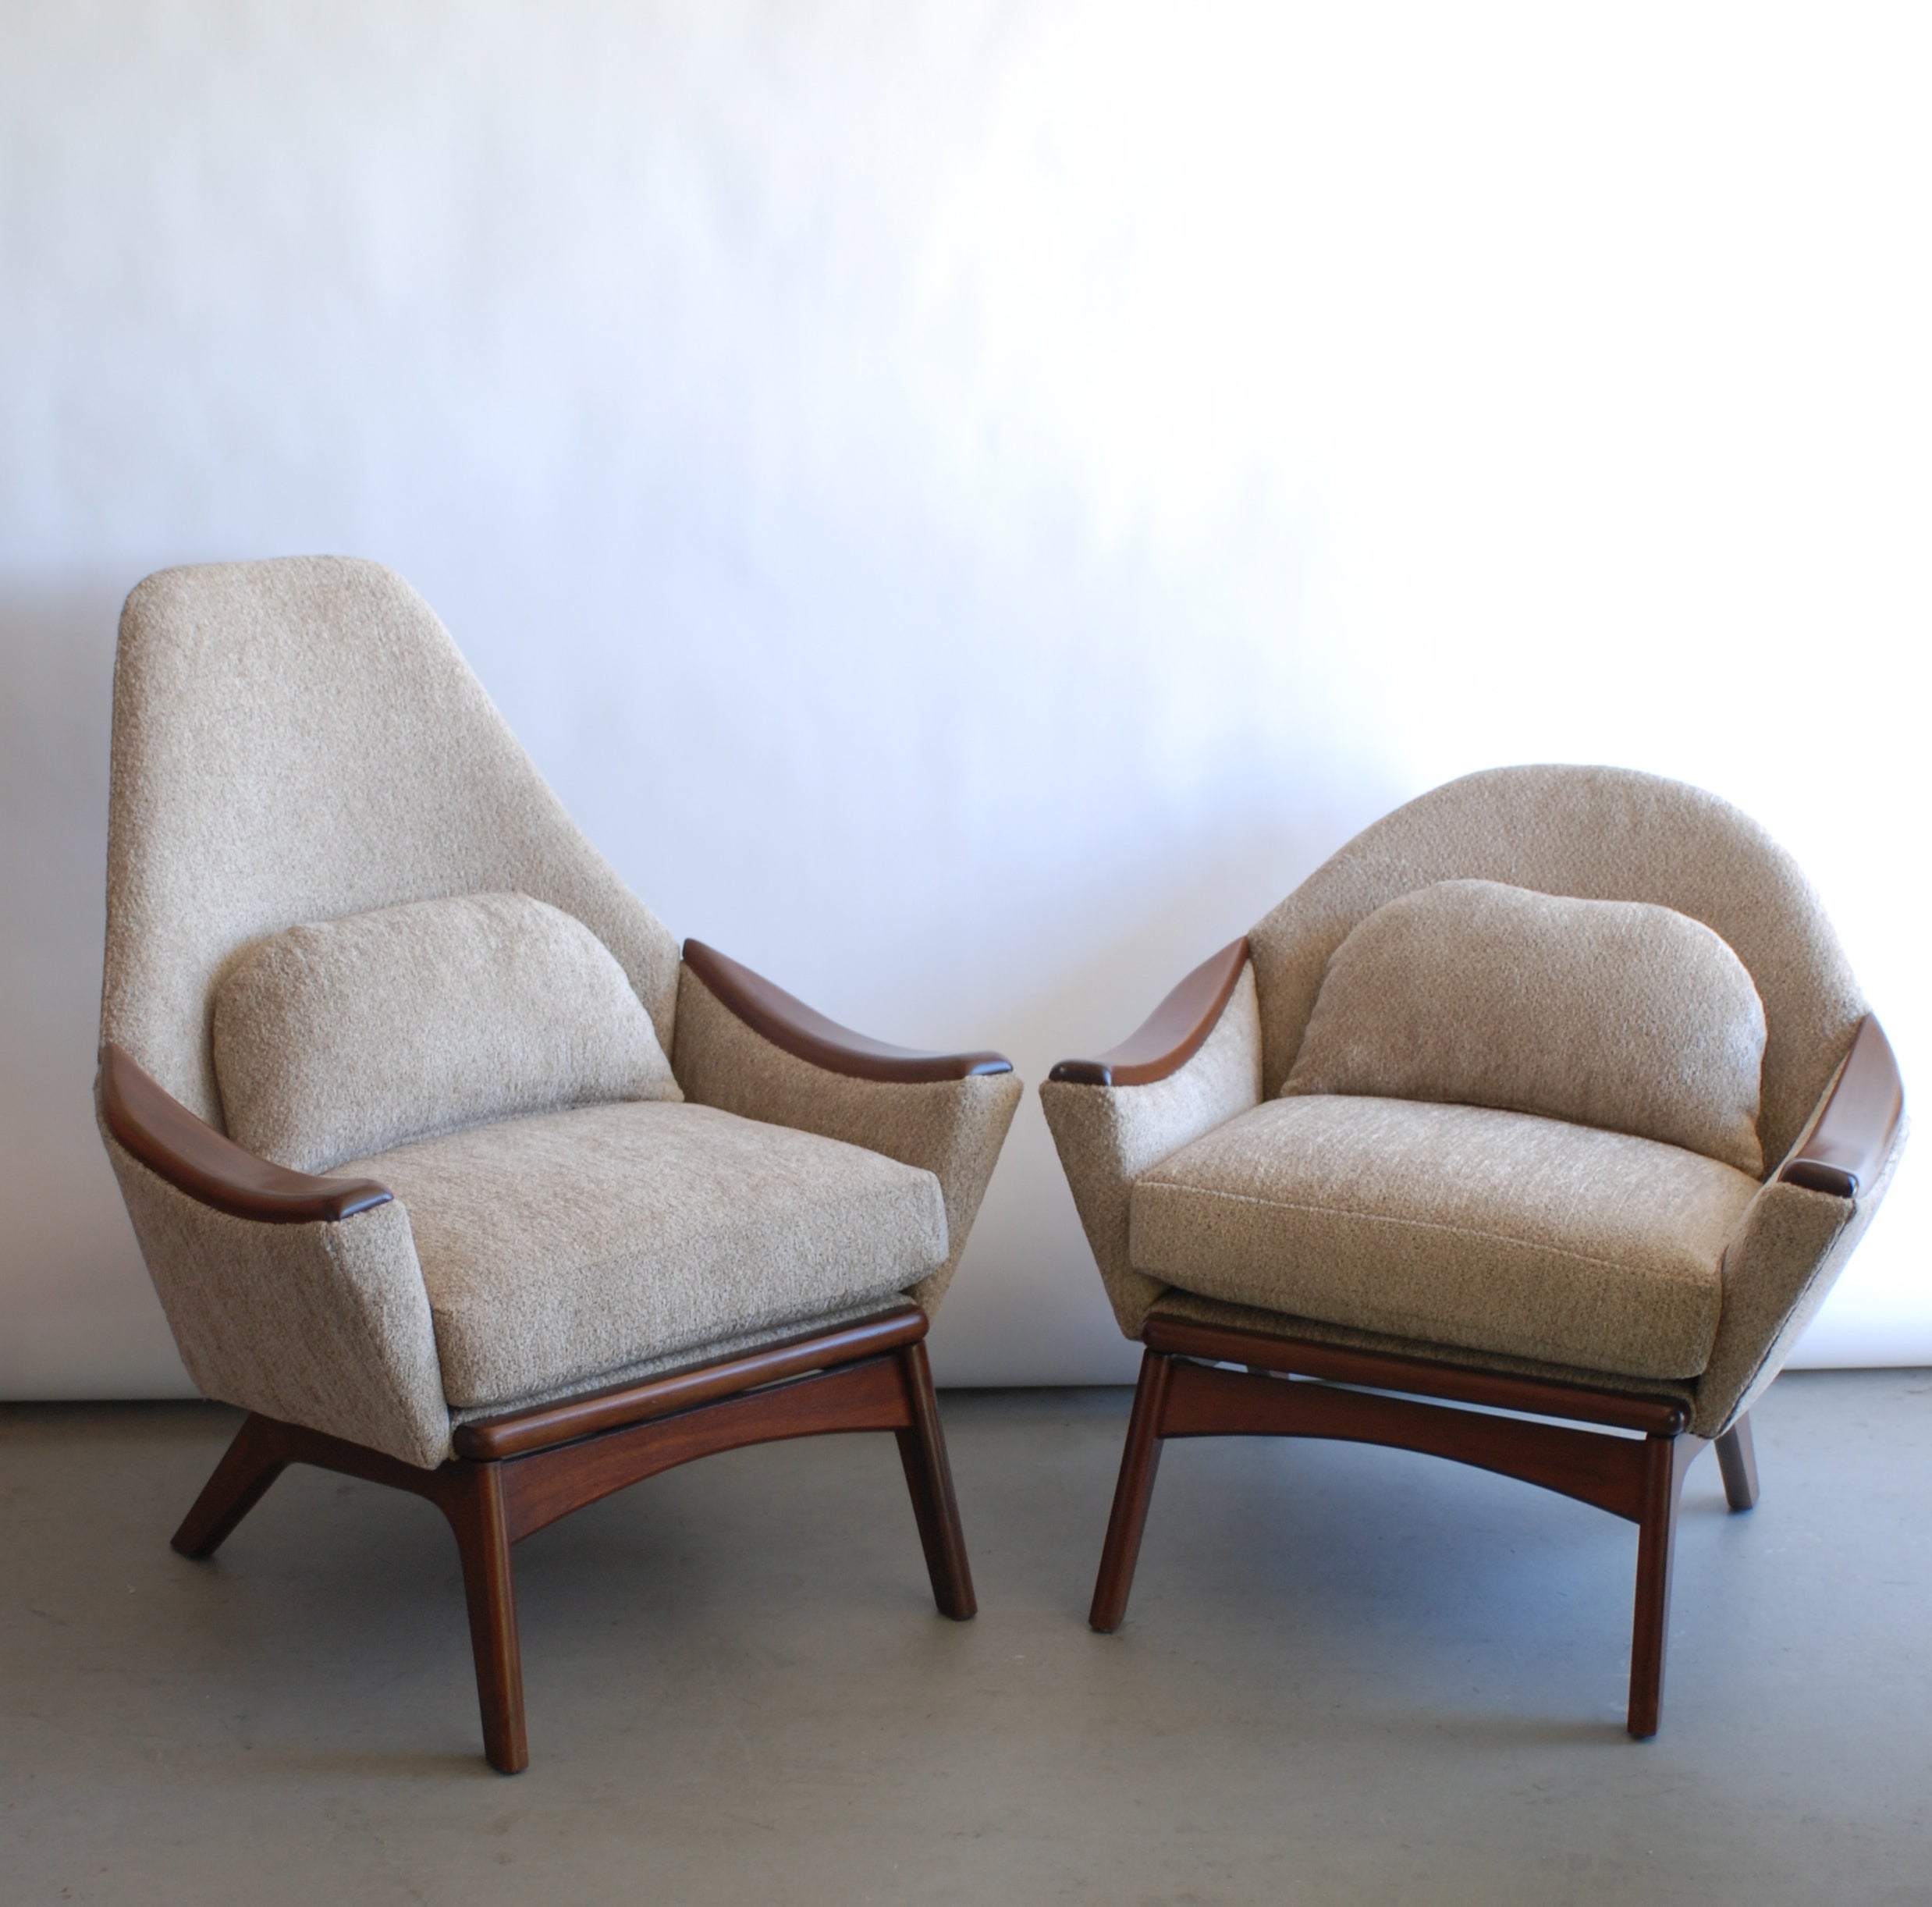 Set of His and Hers Adrian Pearsall Lounge Chairs